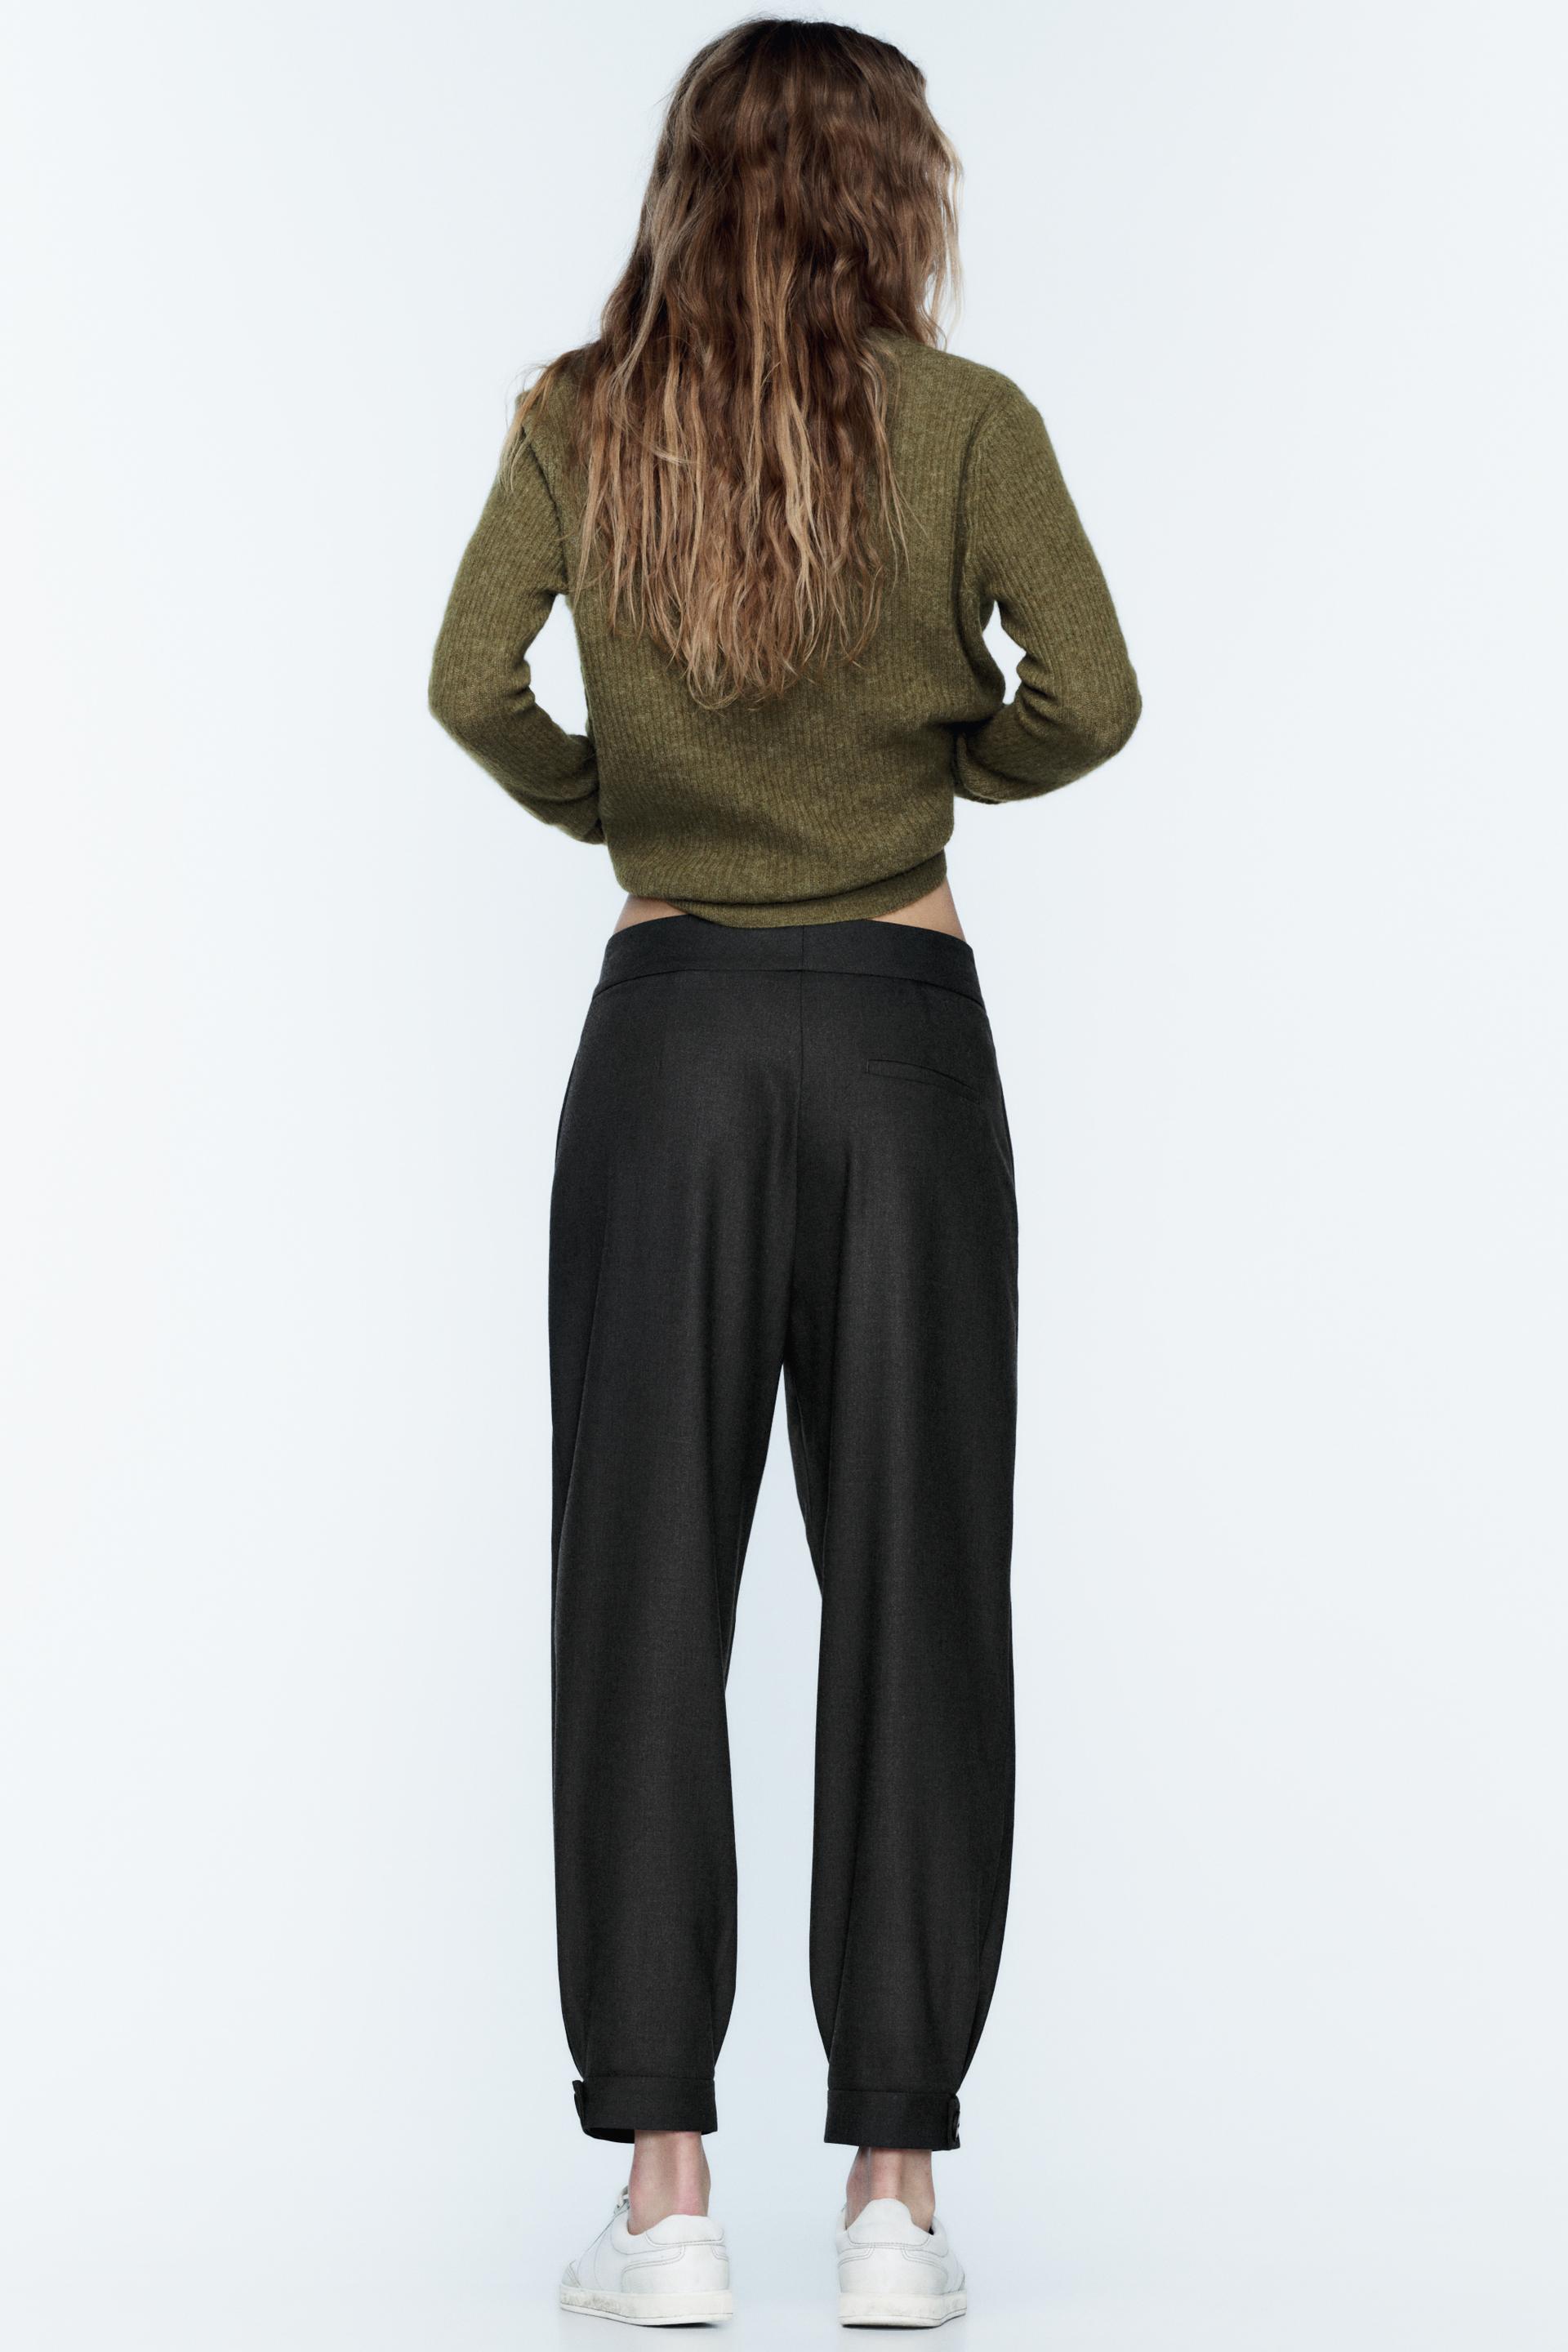 ZARA WOMAN NWT CUFFED TROUSER PANTS WITH TURN-UP HEMS Brown 2232/645 Extra  Small